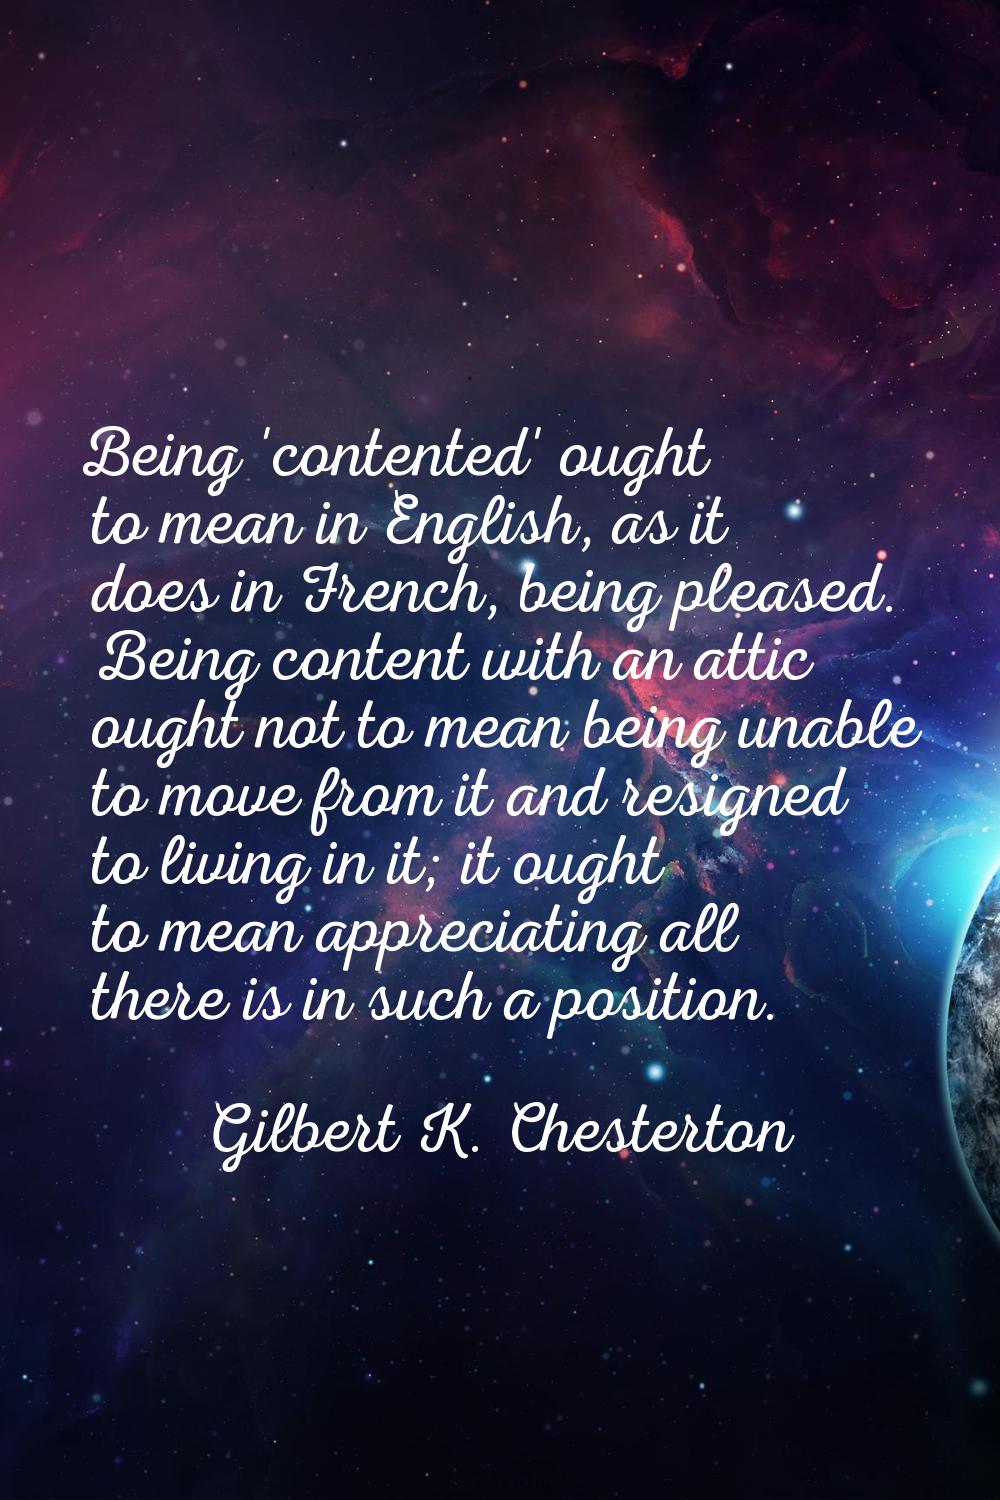 Being 'contented' ought to mean in English, as it does in French, being pleased. Being content with